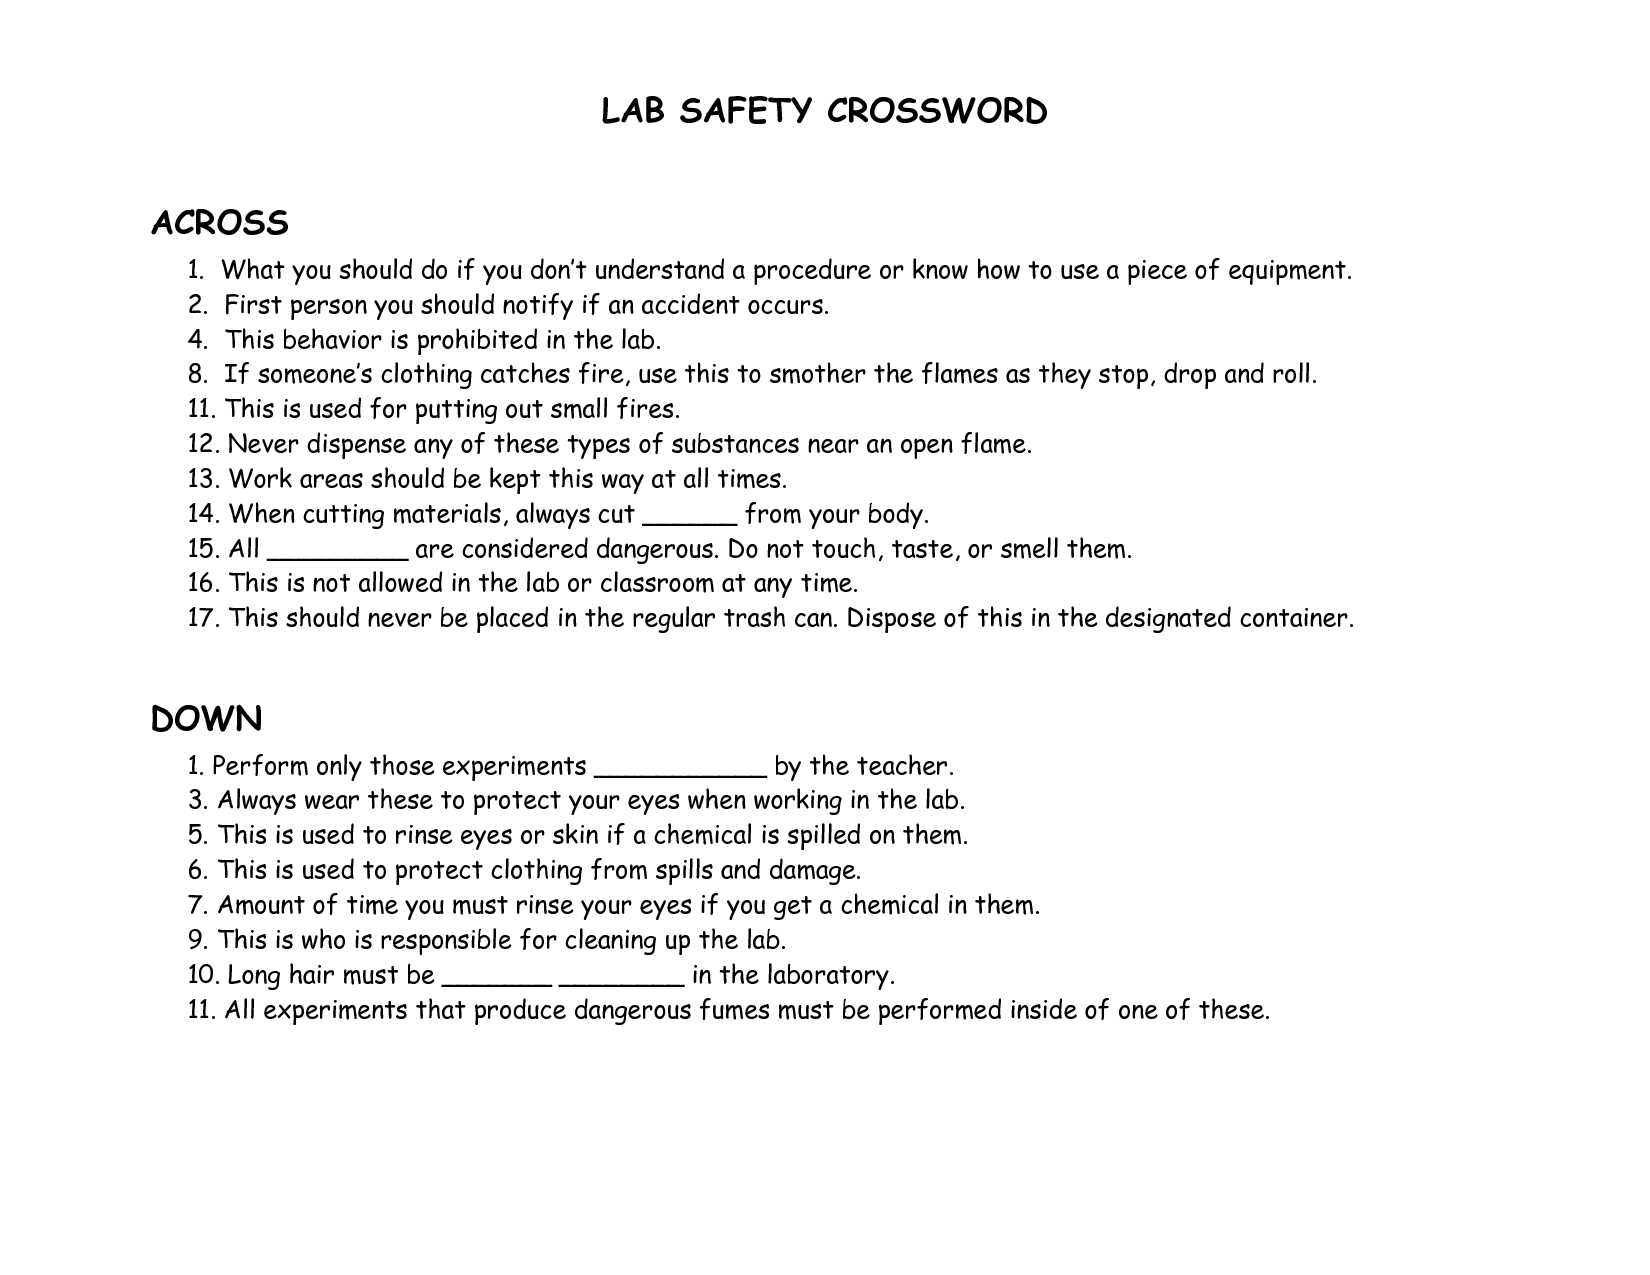 Lab Safety Symbols Worksheet Answer Key as Well as Lab Safety Symbols Worksheet Cool Laboratory Rules and Safety